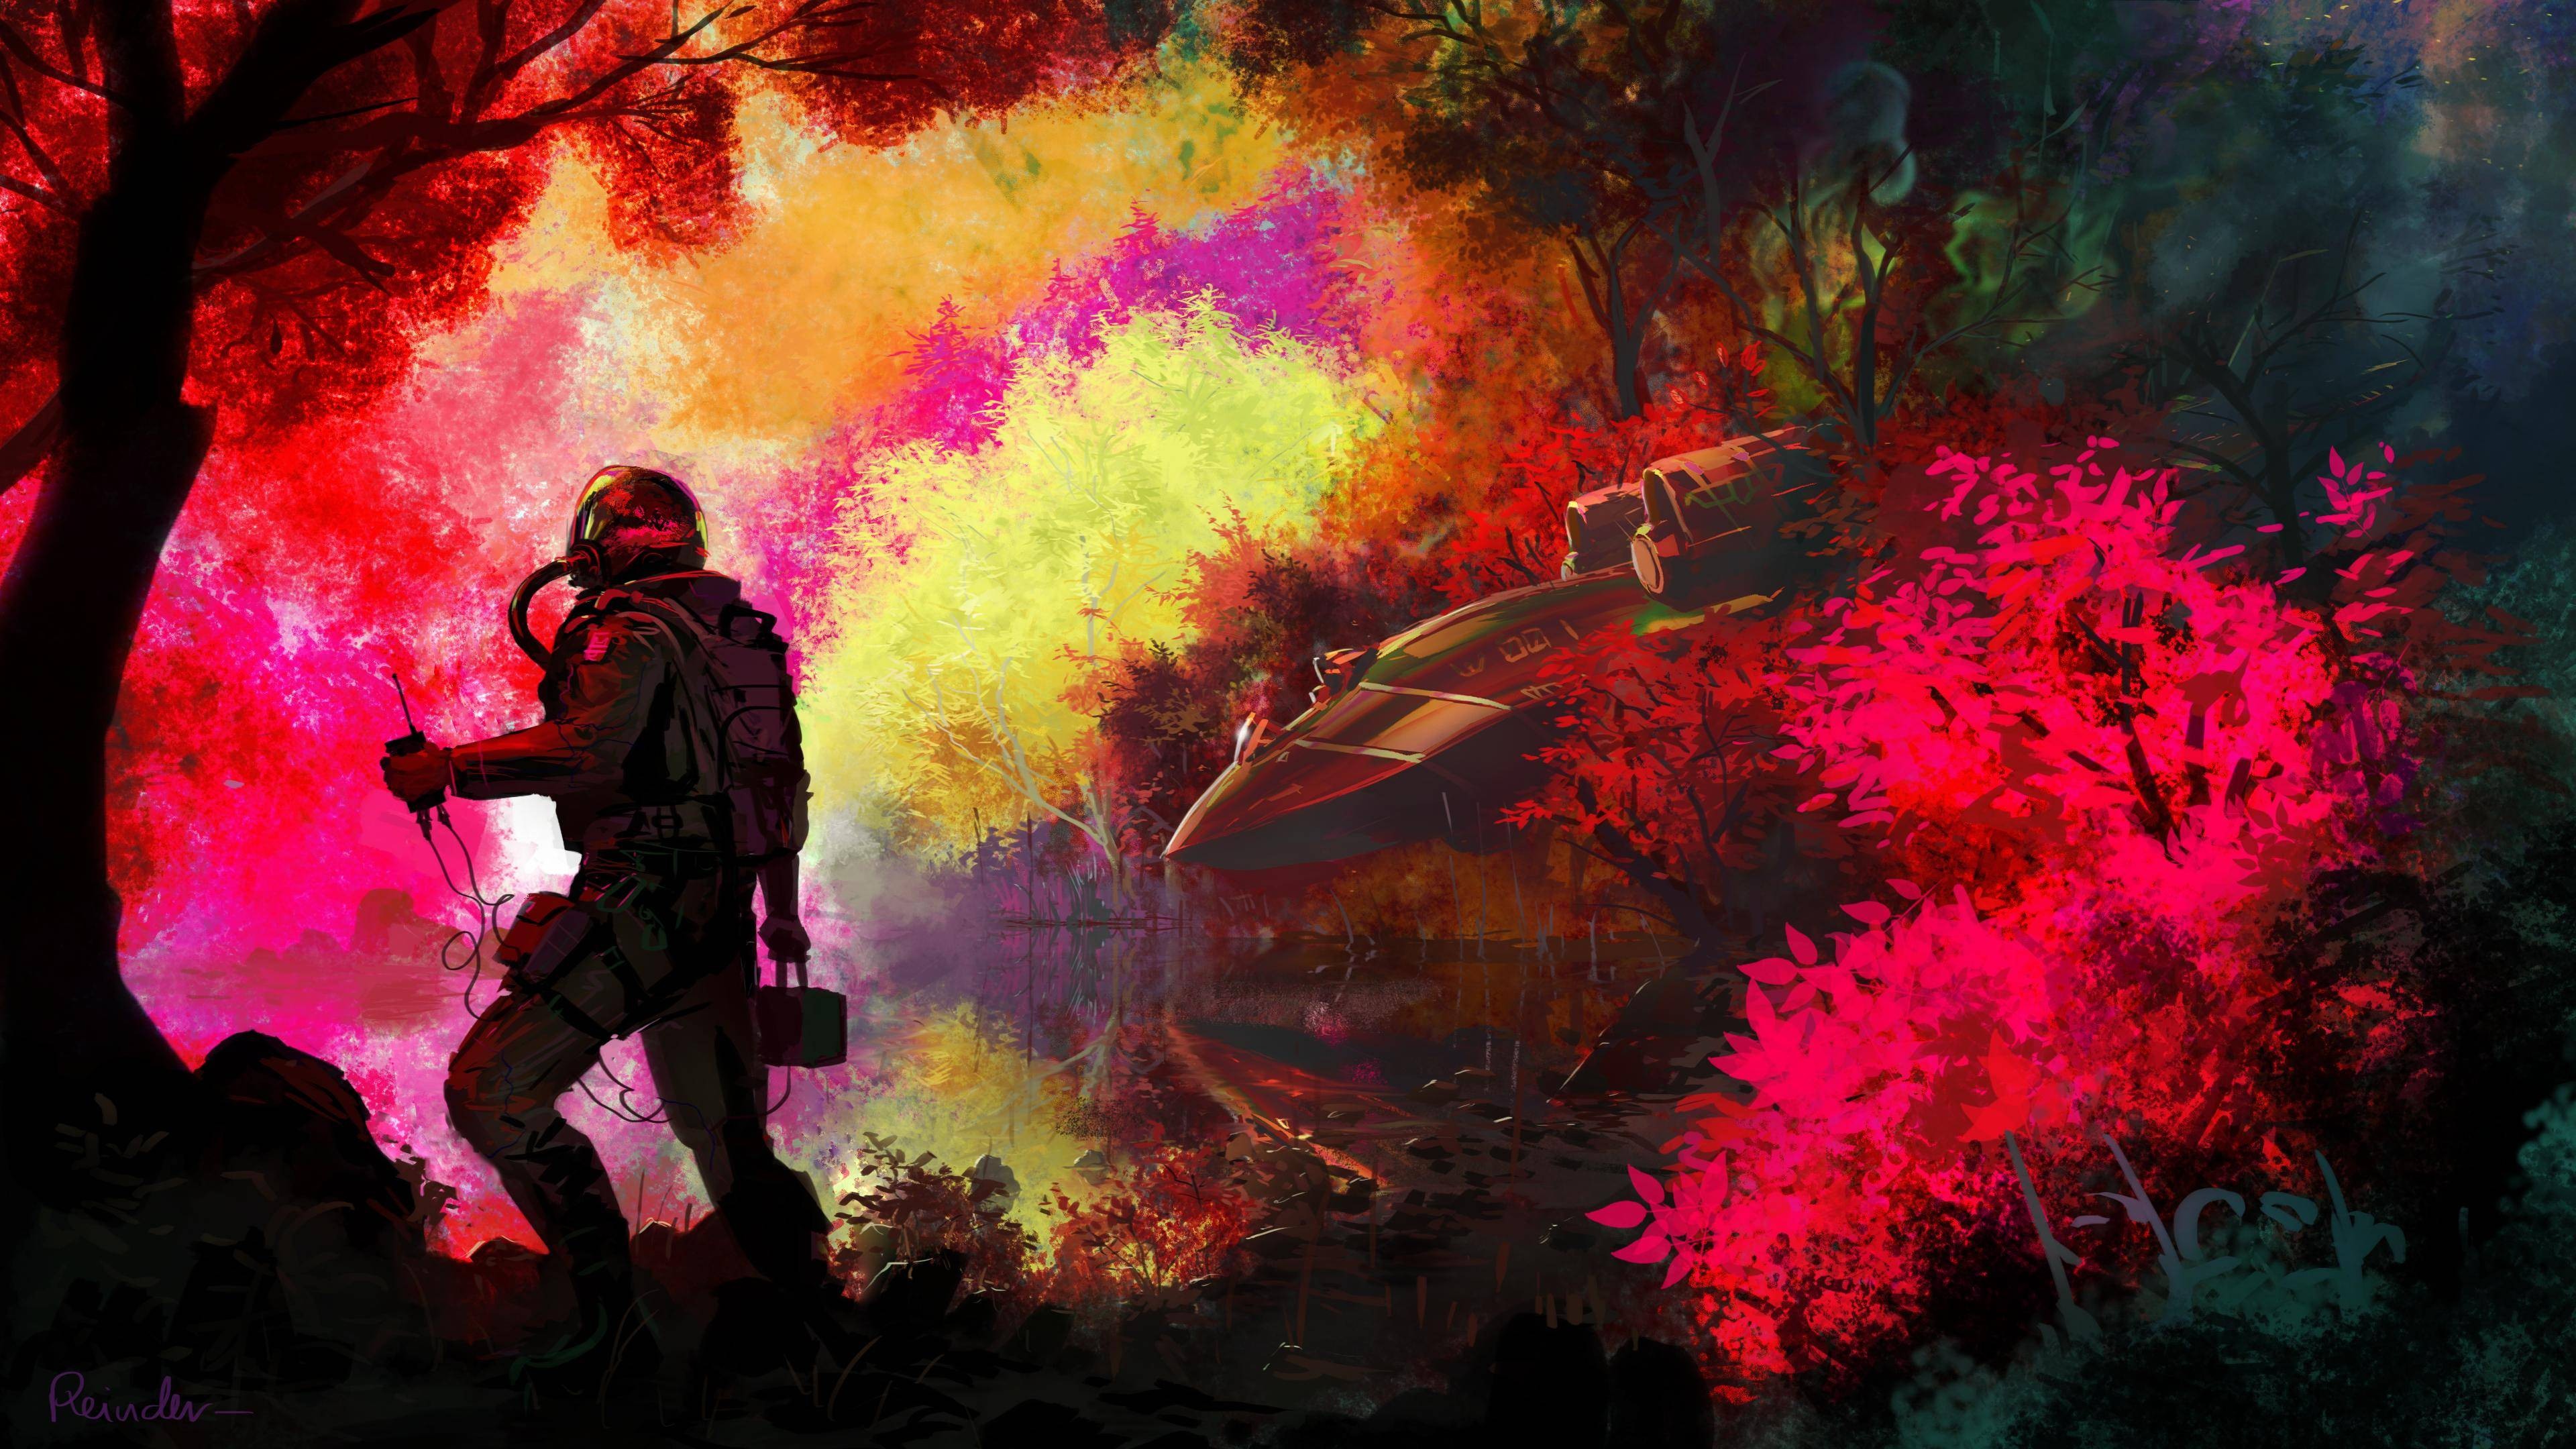 General 3840x2160 astronaut spaceship lake colorful reflection military aircraft trees artwork spacesuit aliens planet forest science fiction photo manipulation crash pilot